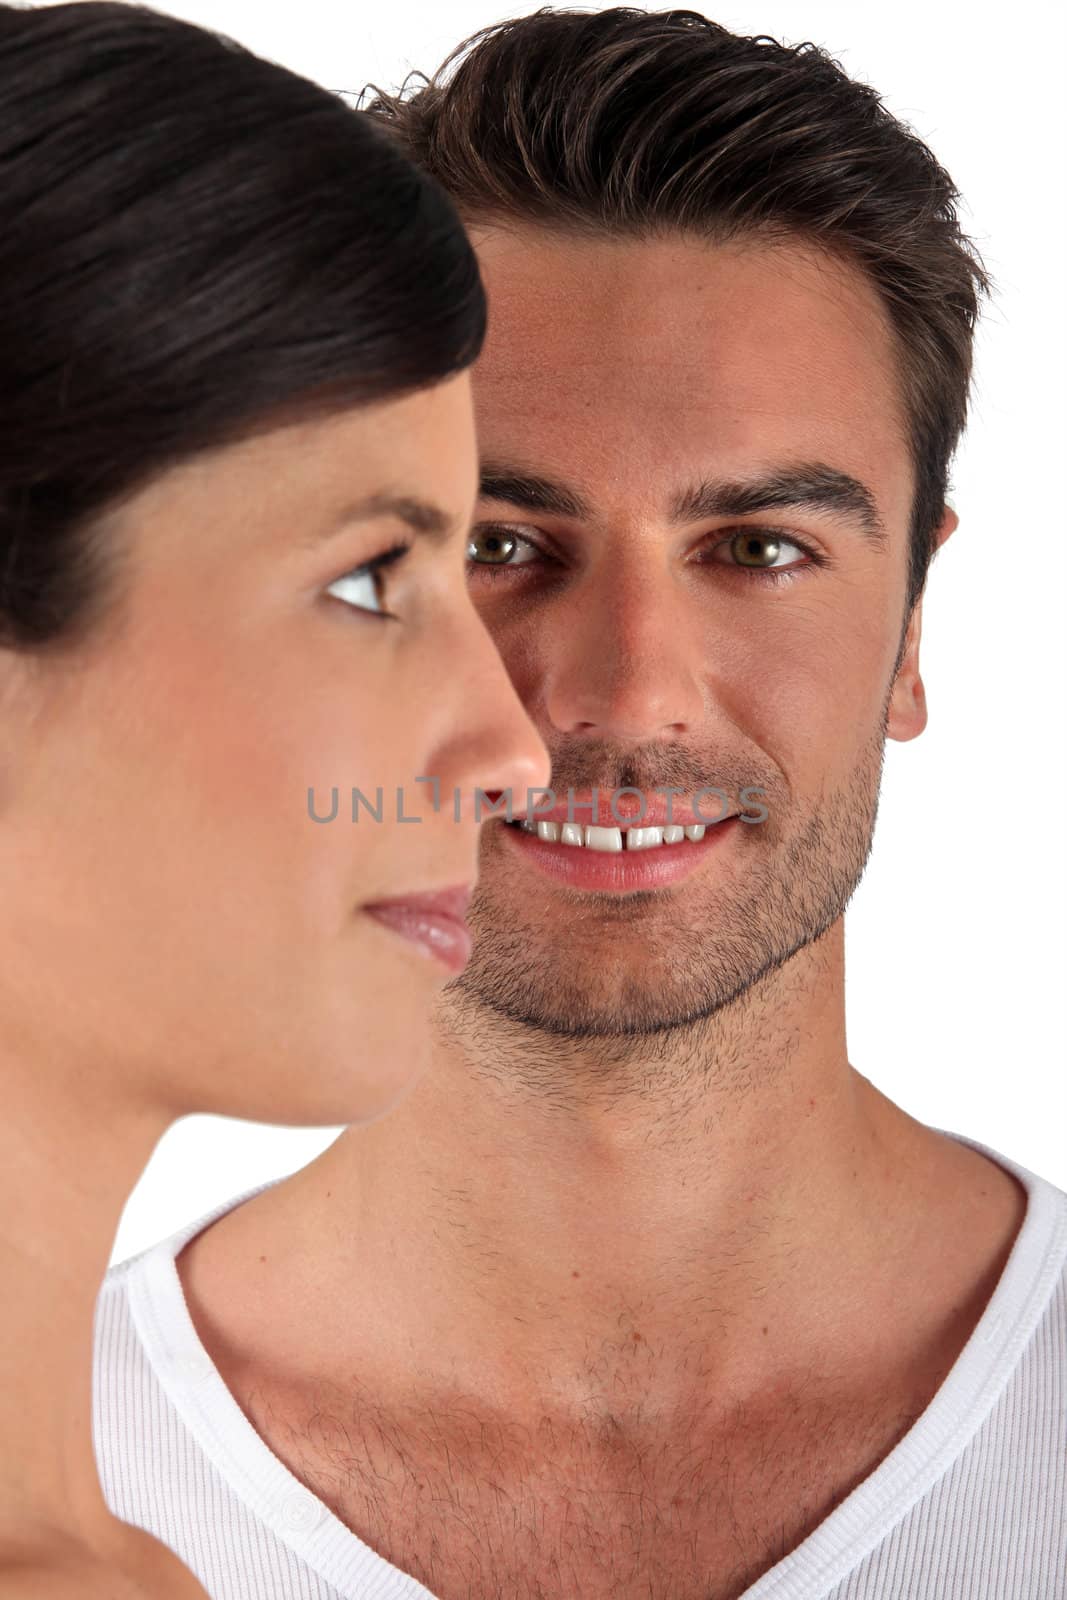 Couple facing different directions